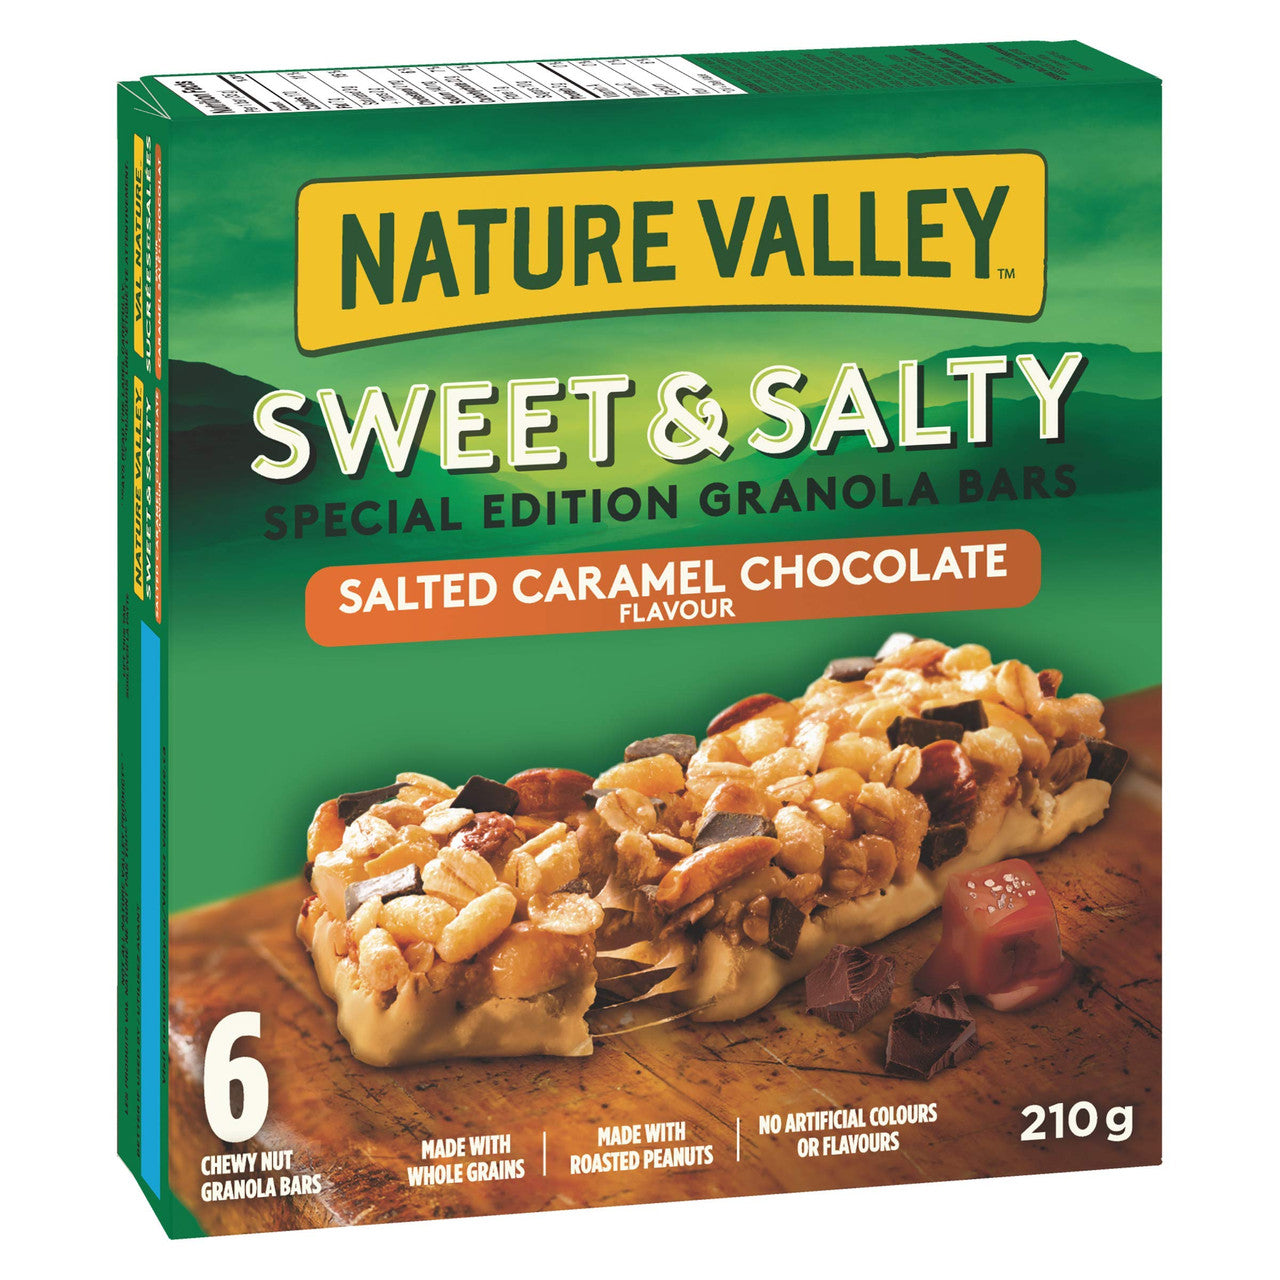 Nature Valley Sweet & Salty Salted Caramel Chocolate Flavoured Granola Bars, Special Edition, 6 Count, 210g/7.4 oz., {Imported from Canada}